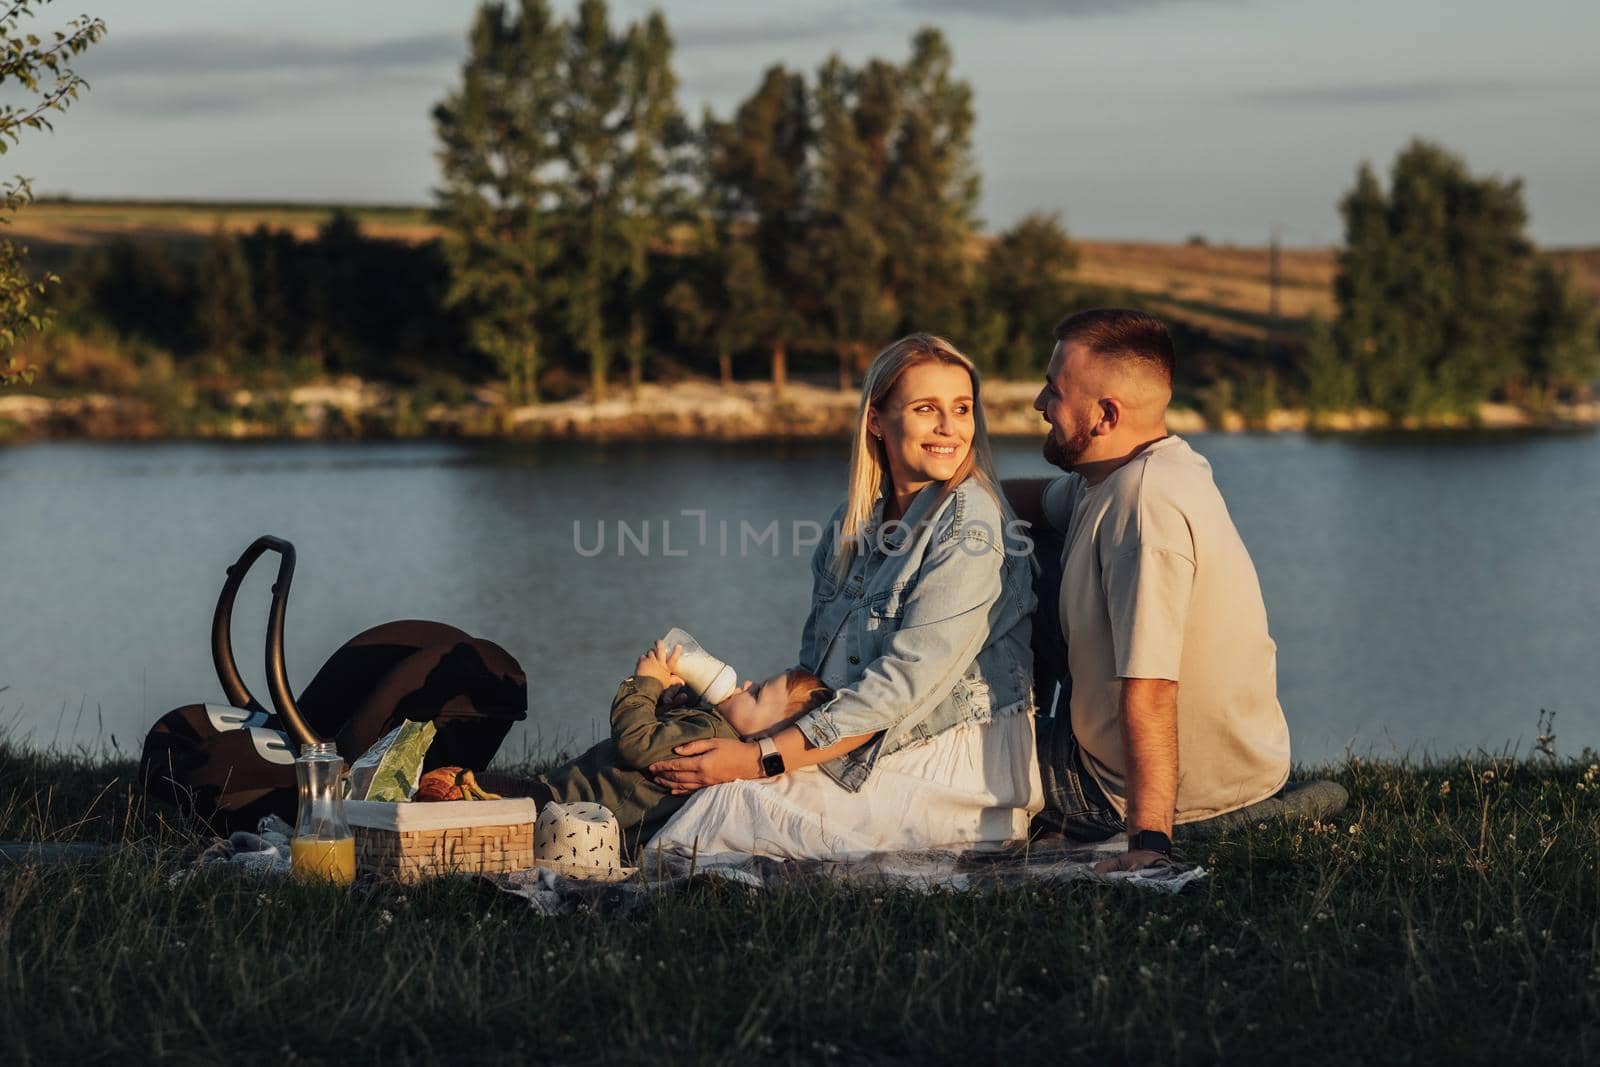 Couple with Their Little Son Having a Picnic Outdoors by the Lake, Young Family Enjoying Weekend Together by Romvy